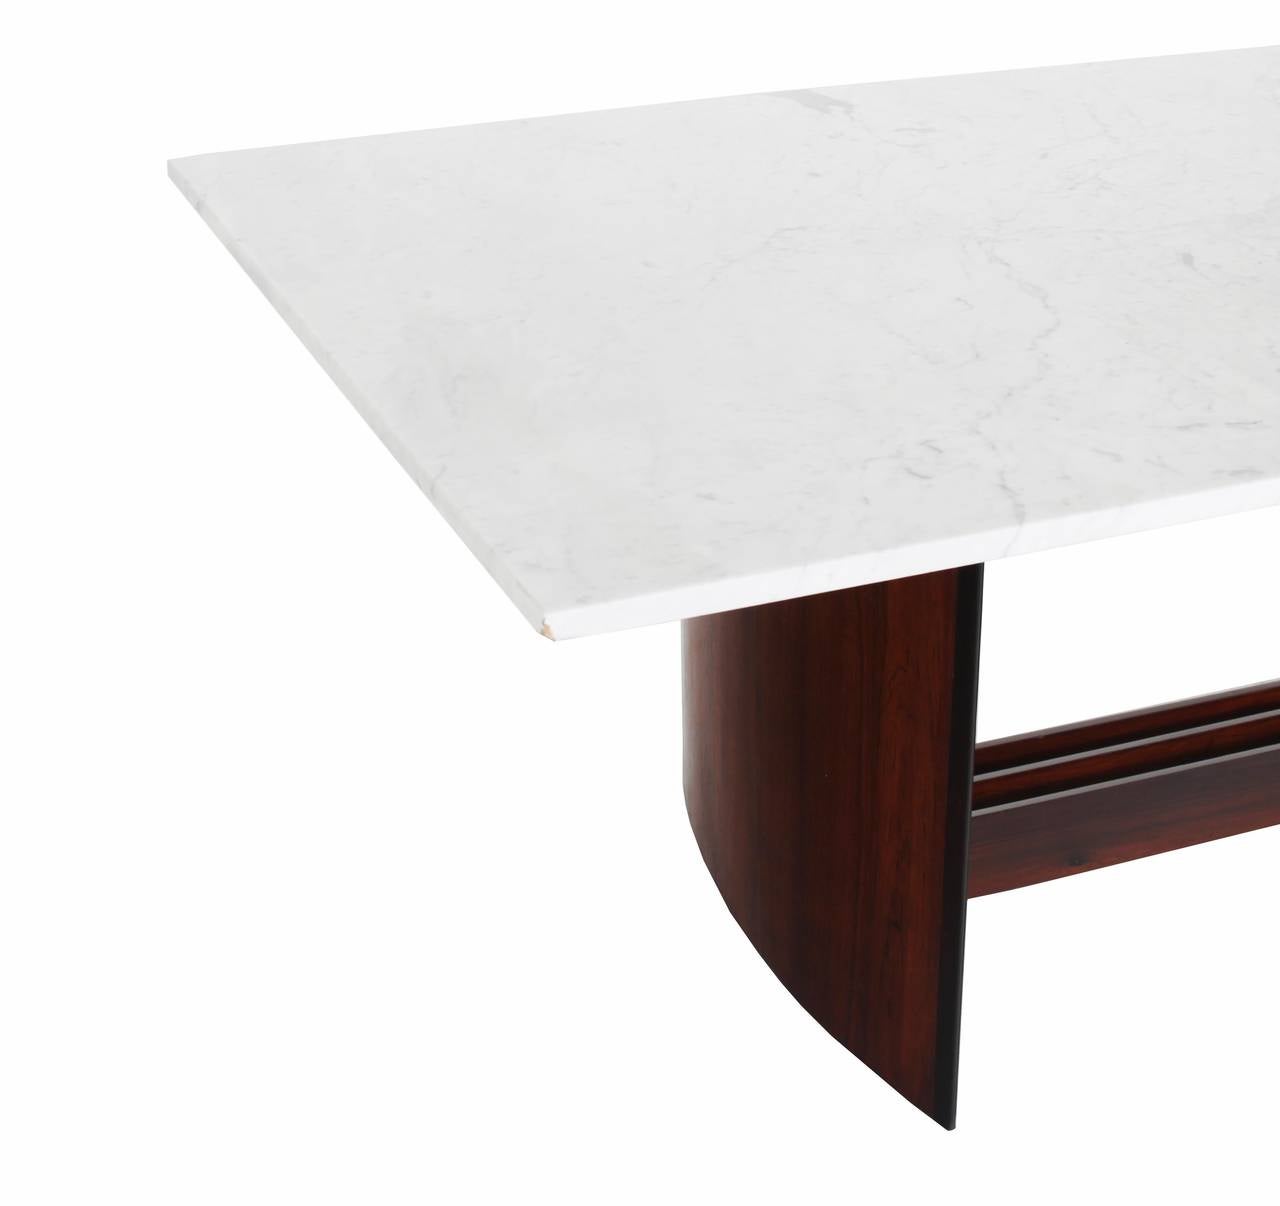 Mid-20th Century Rosewood and Marble Dining Table by Joaquim Tenreiro